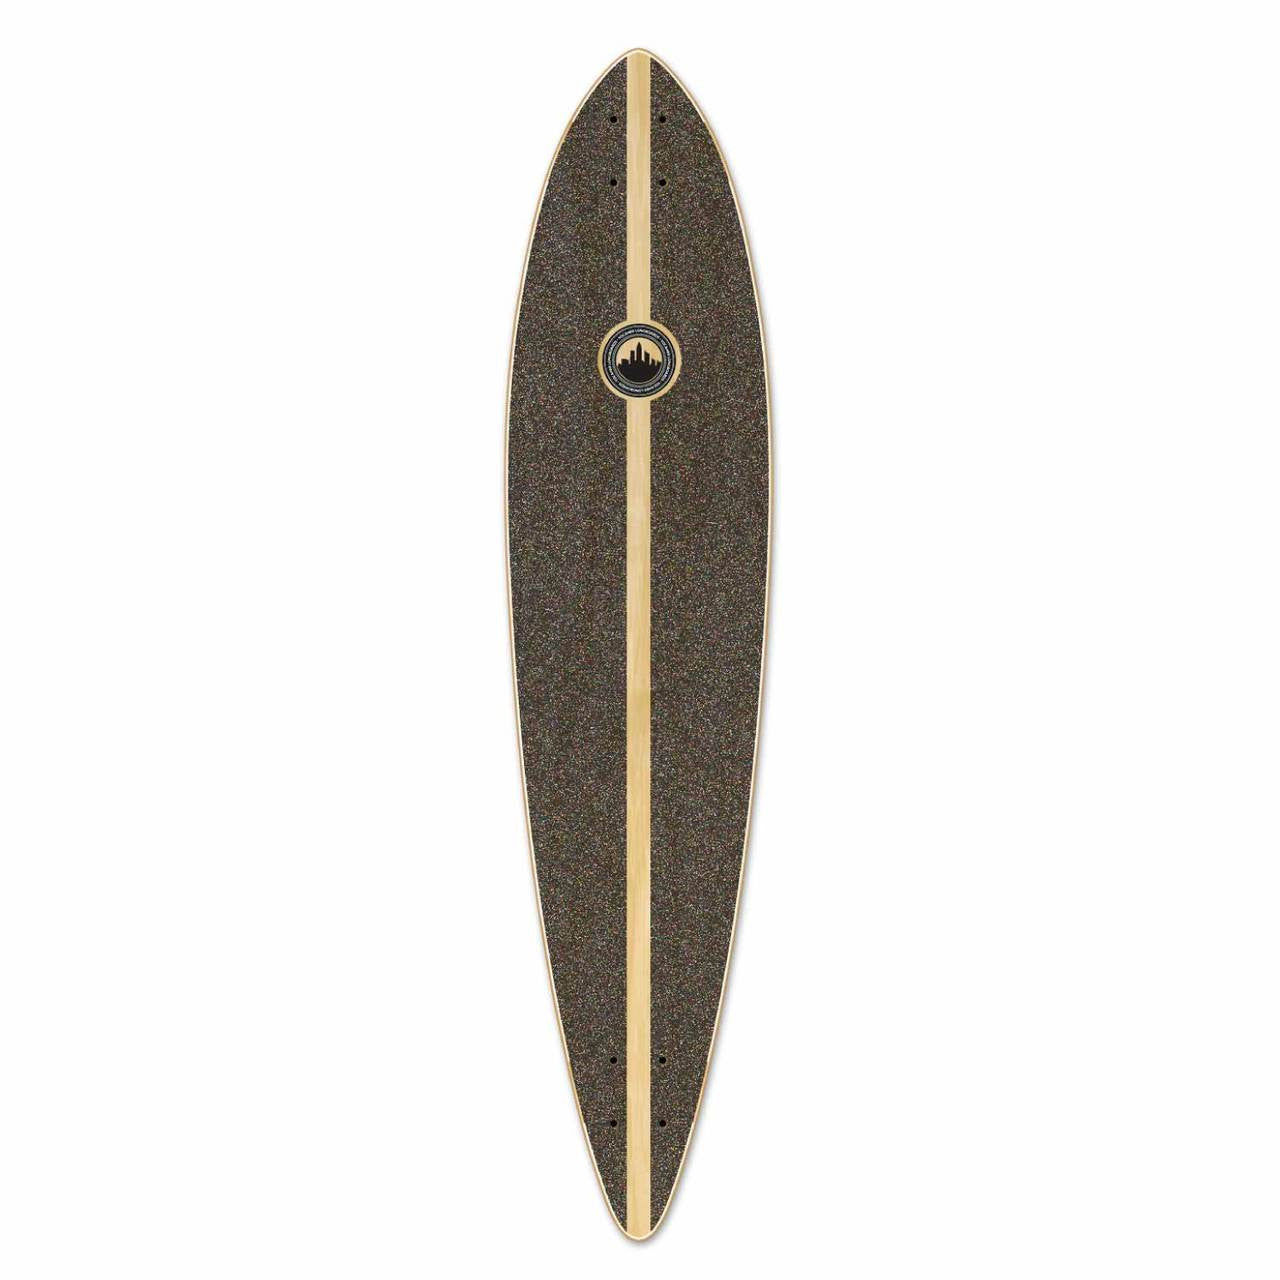 Yocaher Pintail Longboard Deck - In the Pines : Rasta